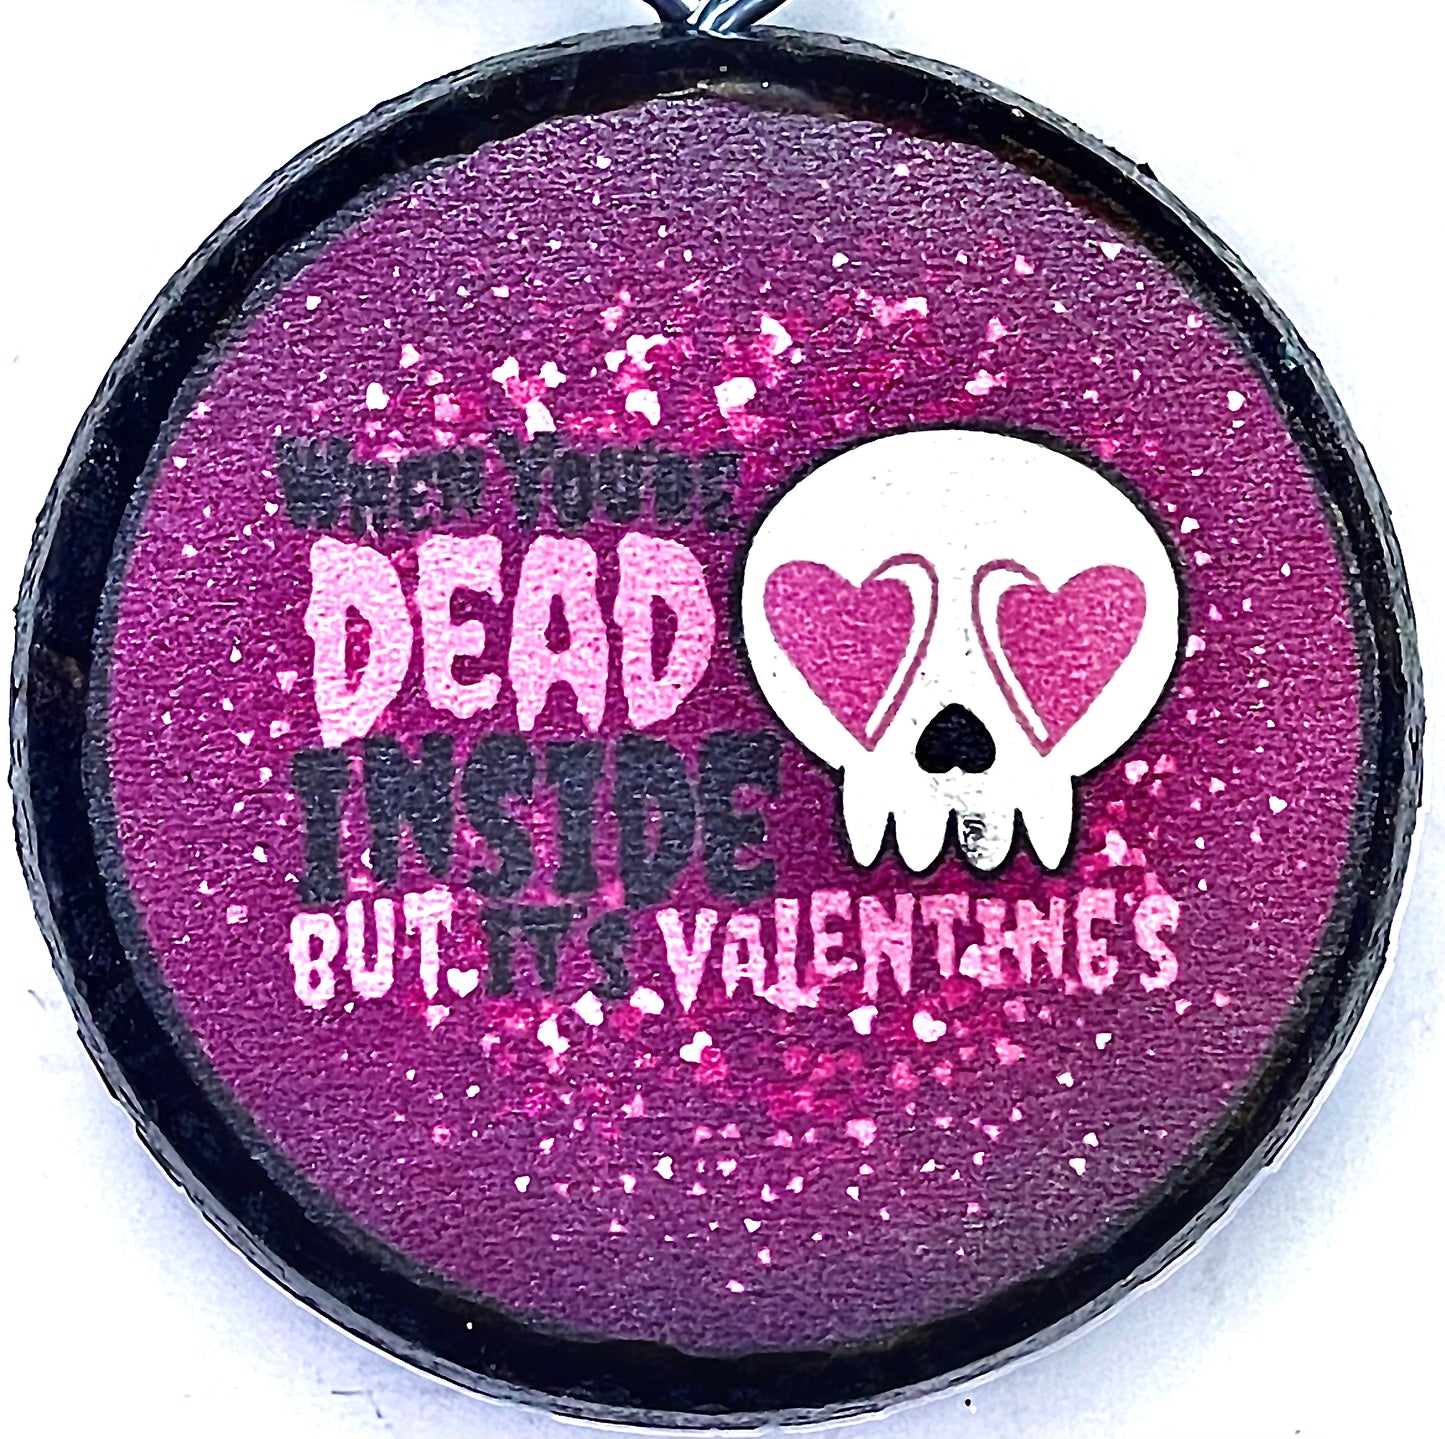 WHEN YOU'RE DEAD INSIDE BUT IT'S VALENTINES